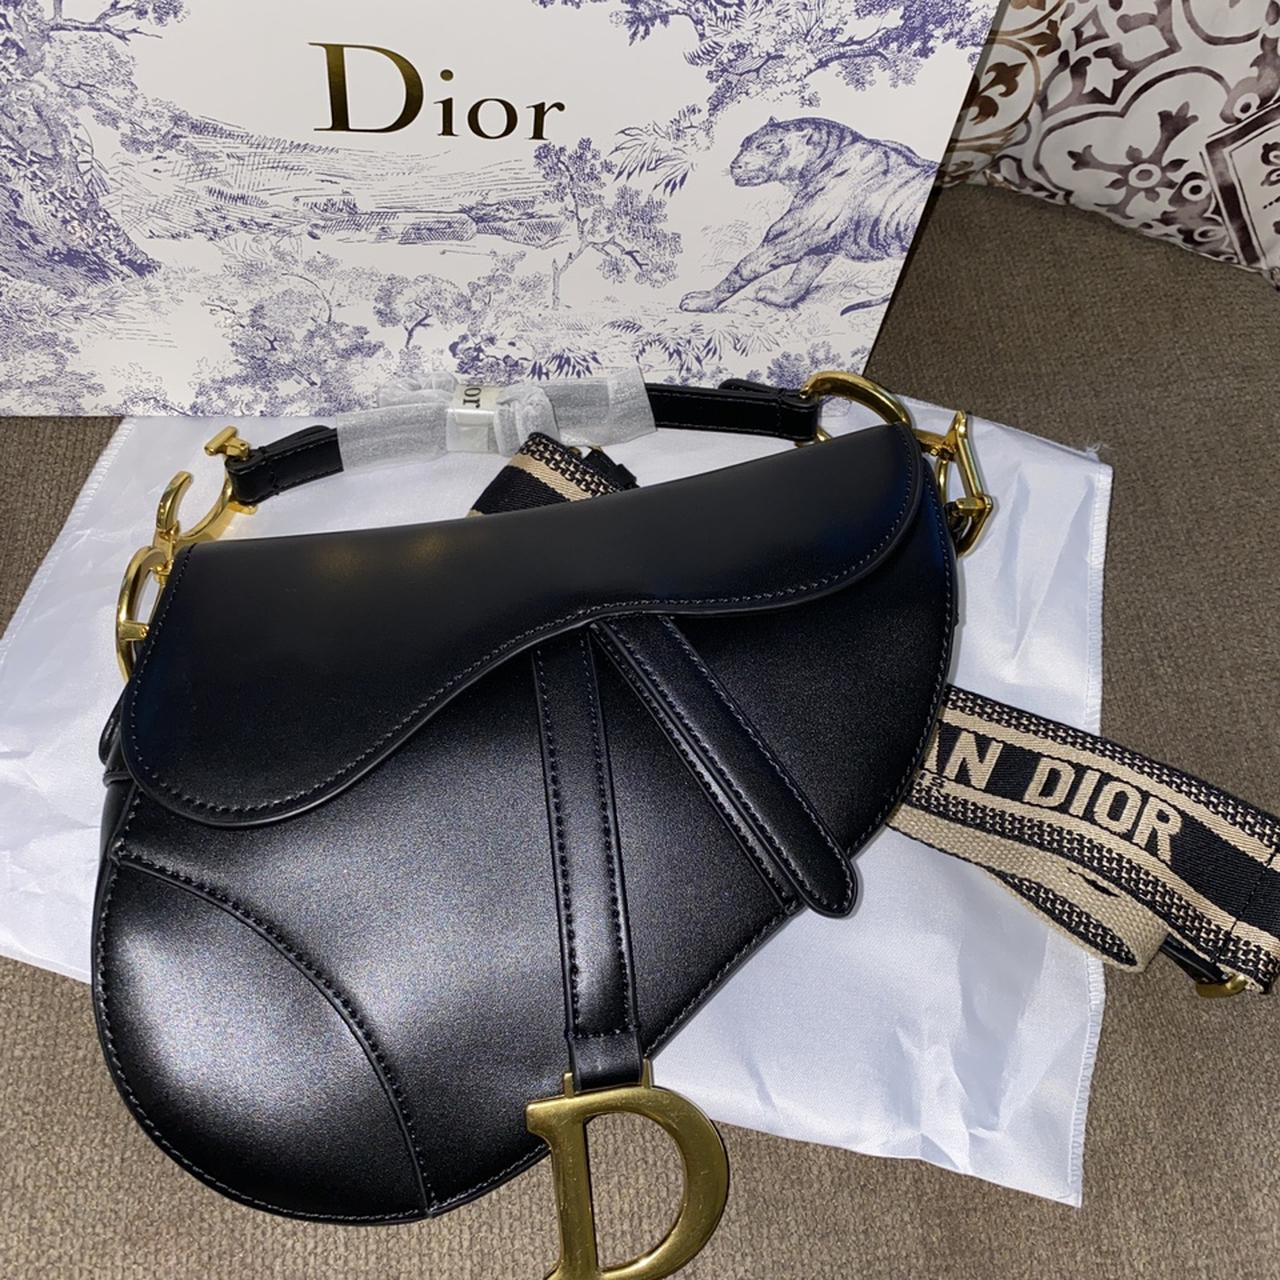 Dior saddle bag replica only  Shopee Philippines